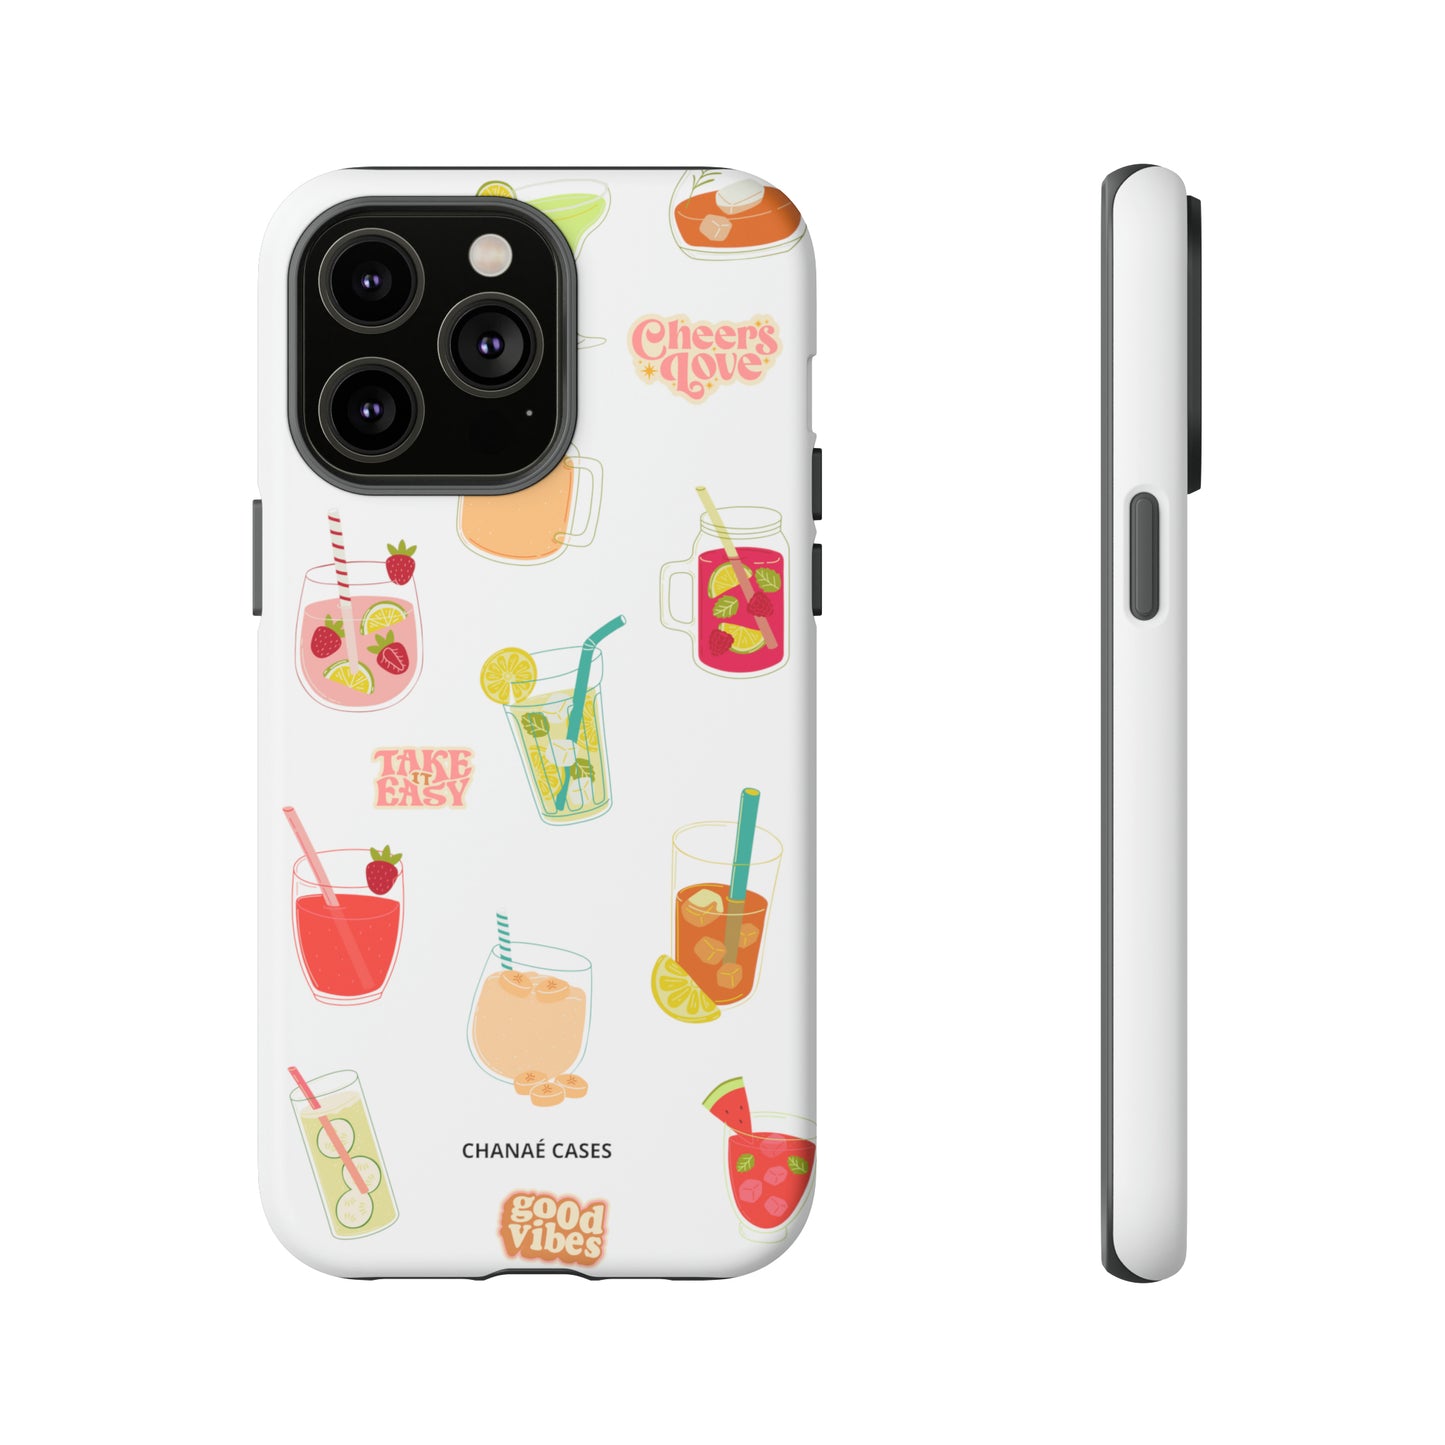 Two-For-One iPhone "Tough" Case (White)